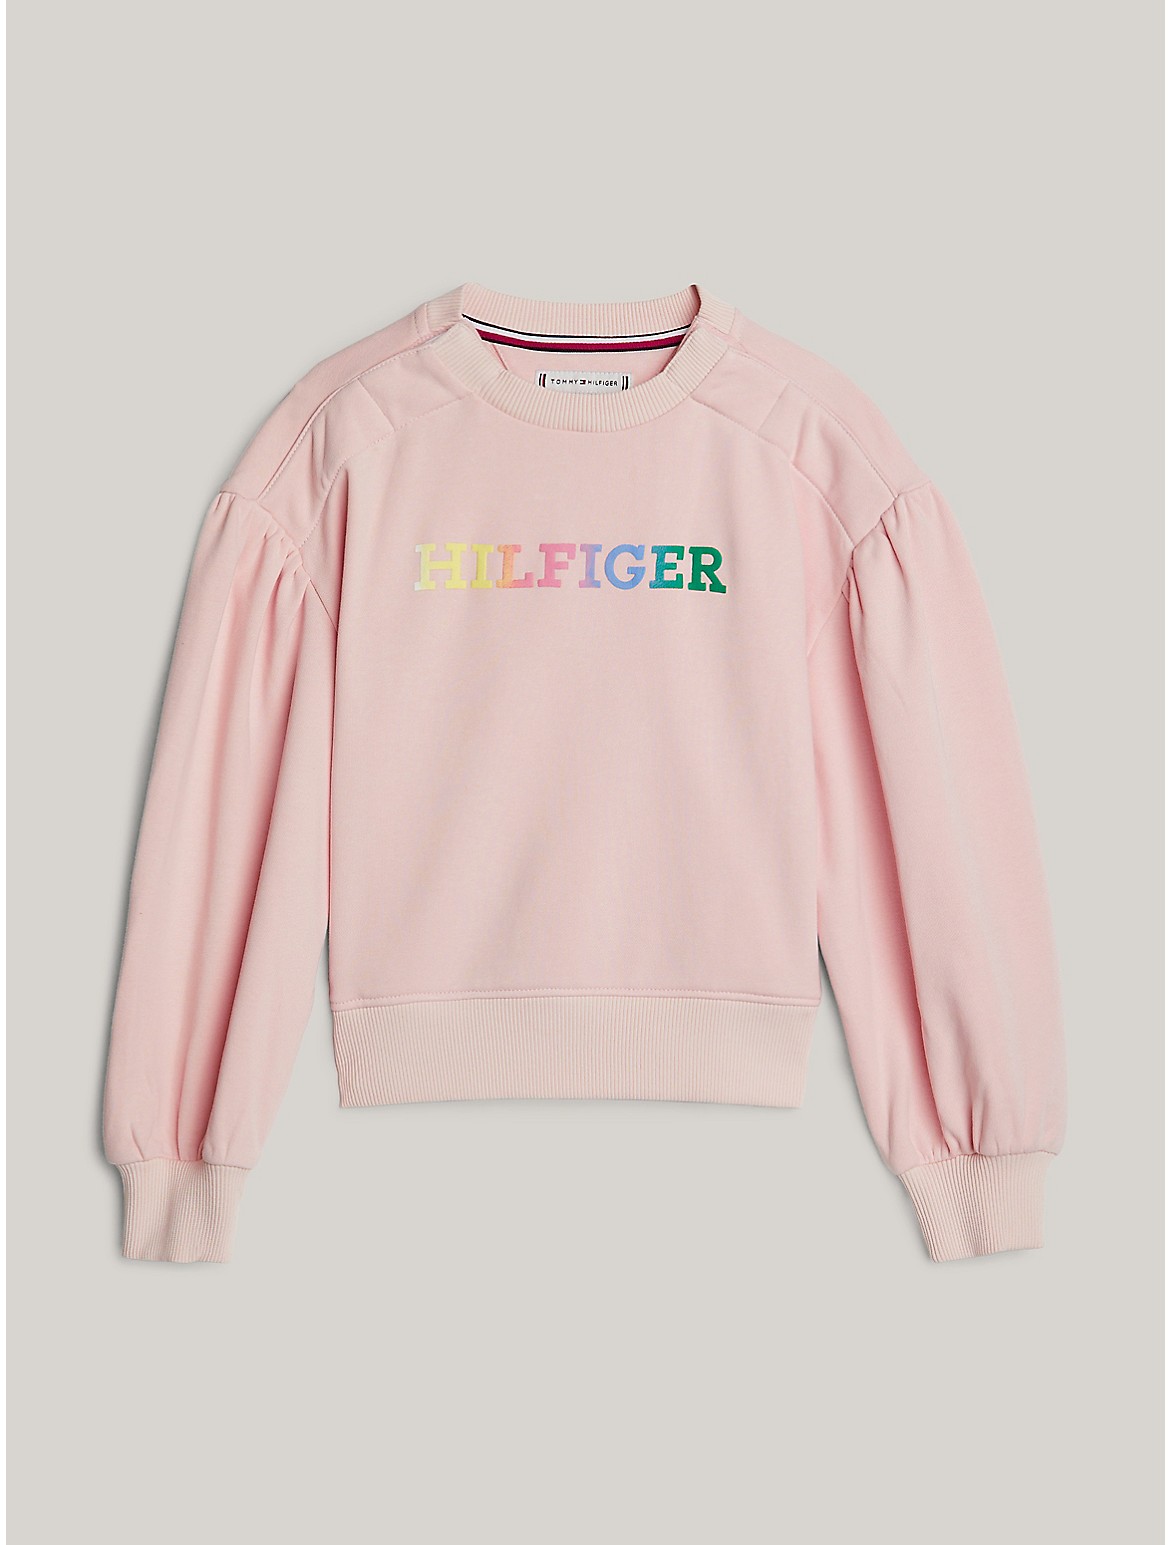 Tommy Hilfiger Girls' Kids' Relaxed Fit Monotype Sweatshirt